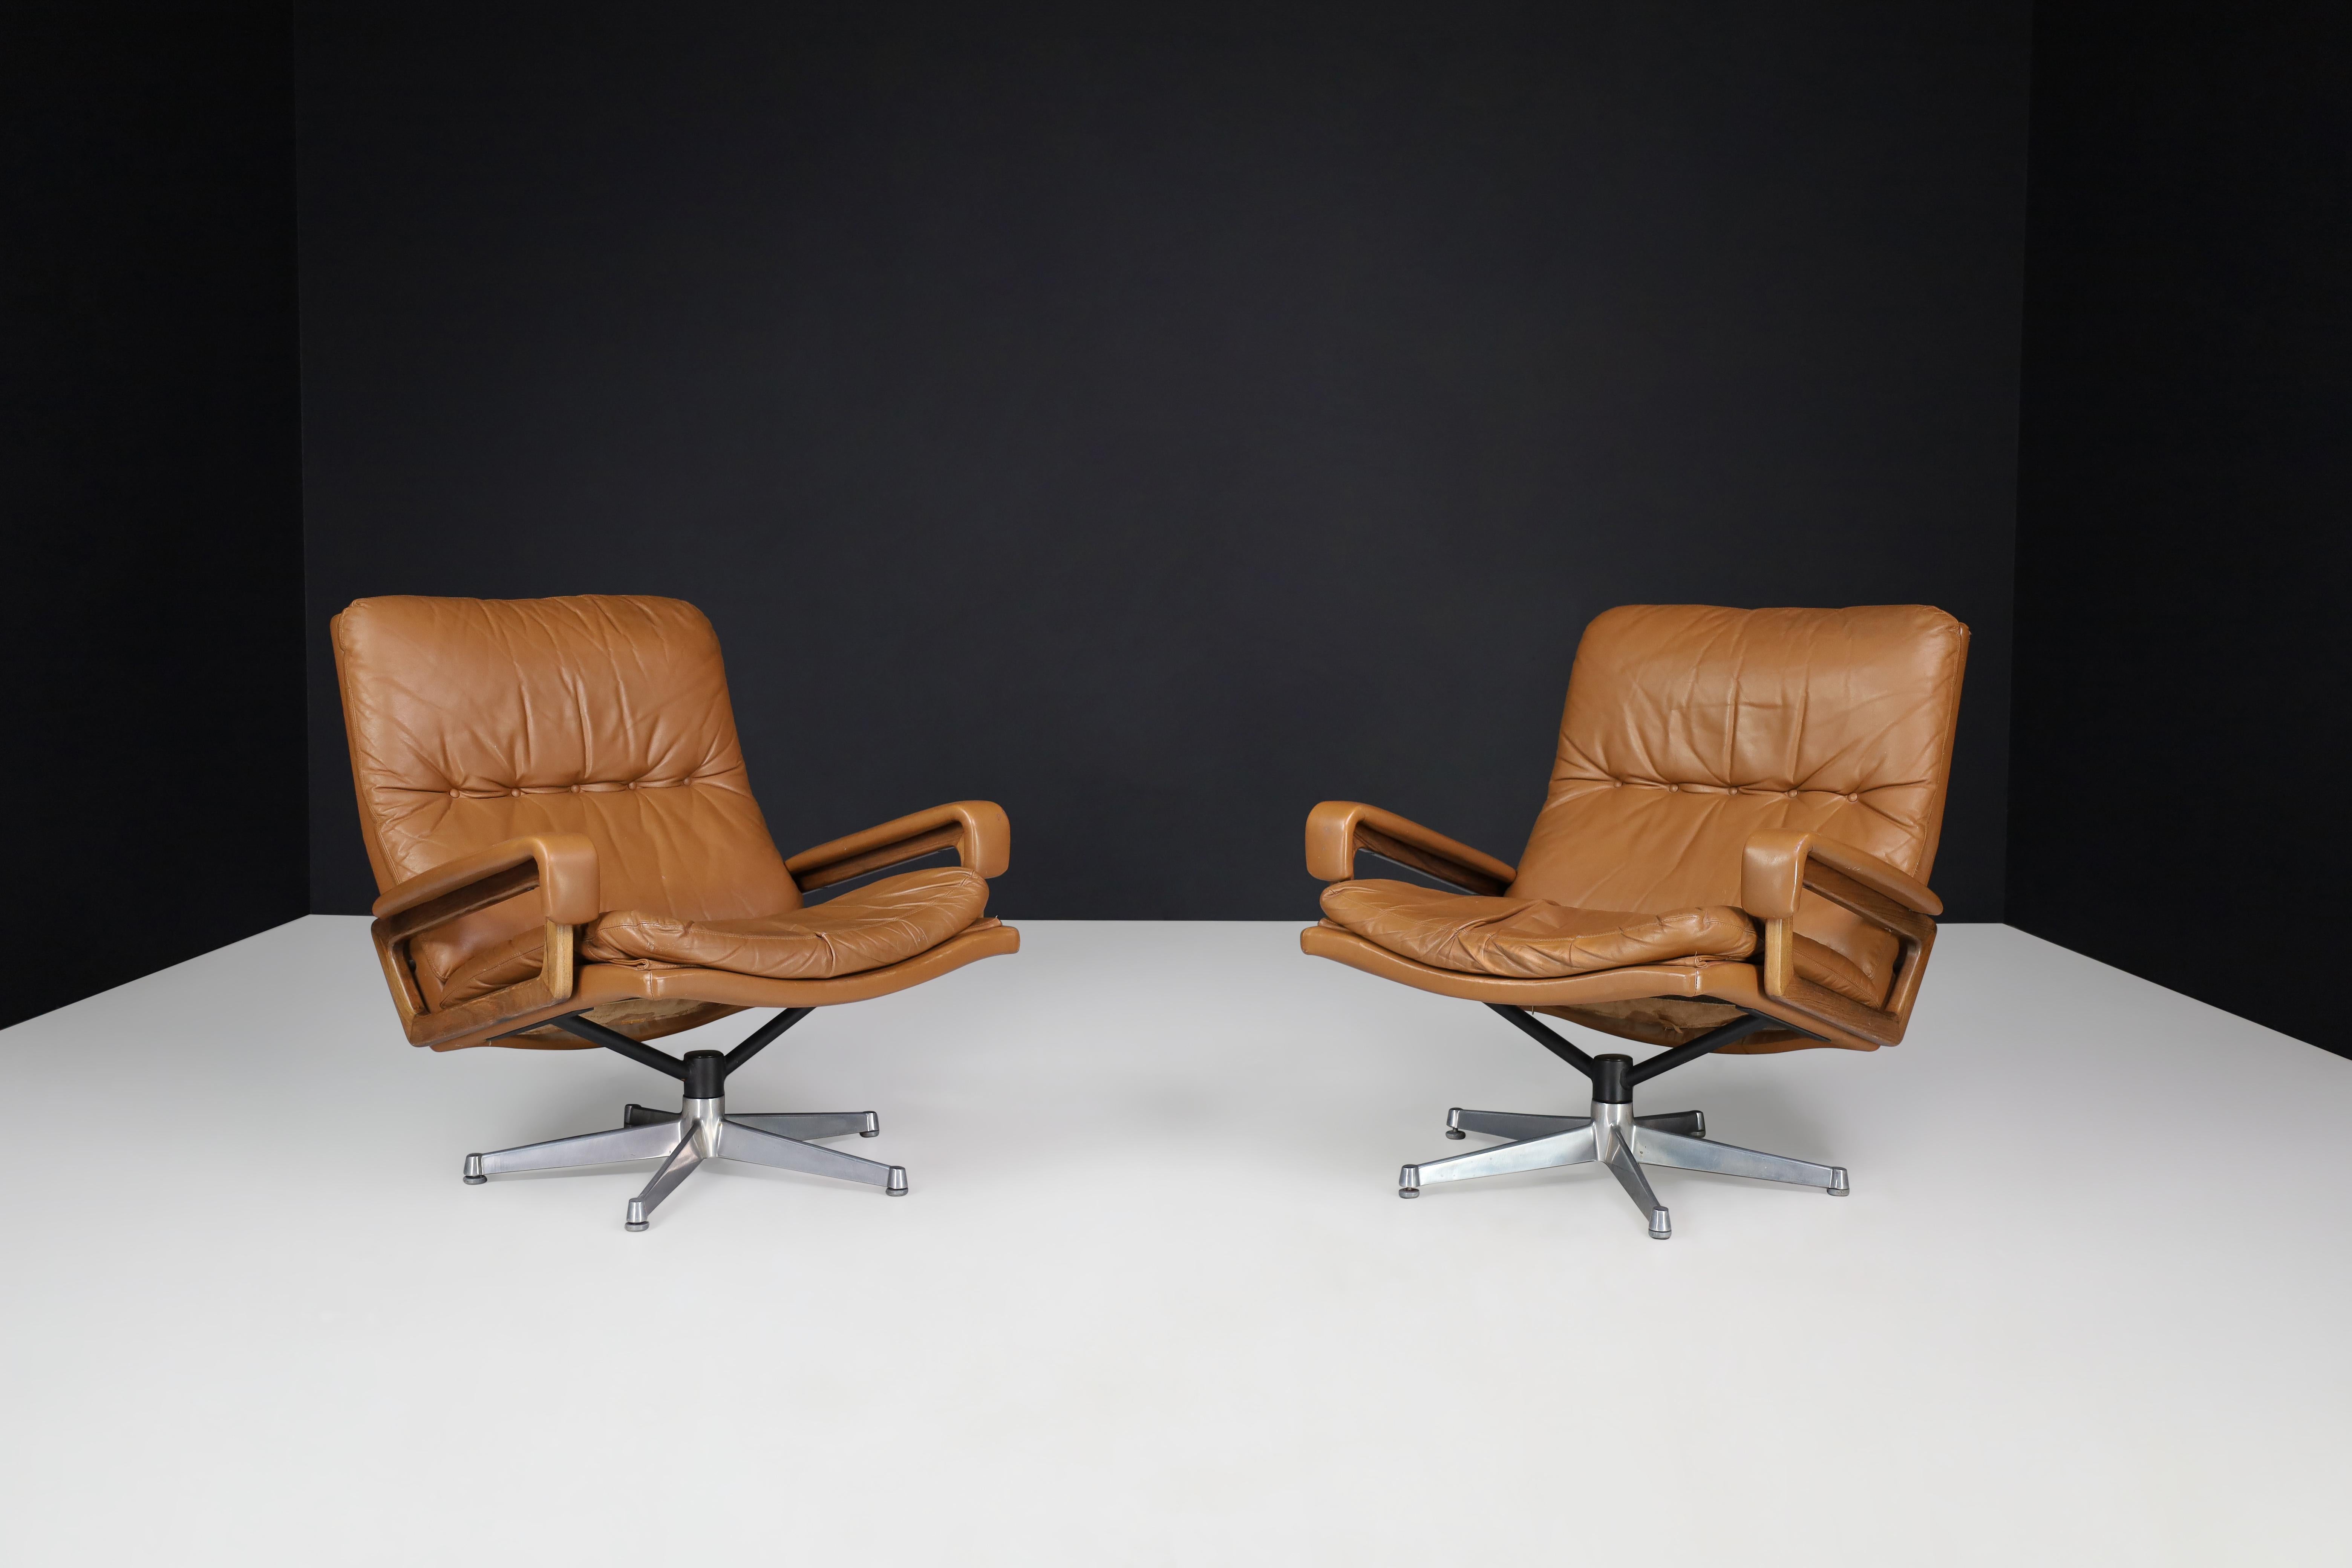 Cognac leather 'King' Chairs by André Vandenbeuck for Strässle, Switzerland, 1970s

These fine leather 'King' model lounge chairs were made by Strässle and designed by André Vandenbeuck in Switzerland in the 1970s. These chairs have wooden